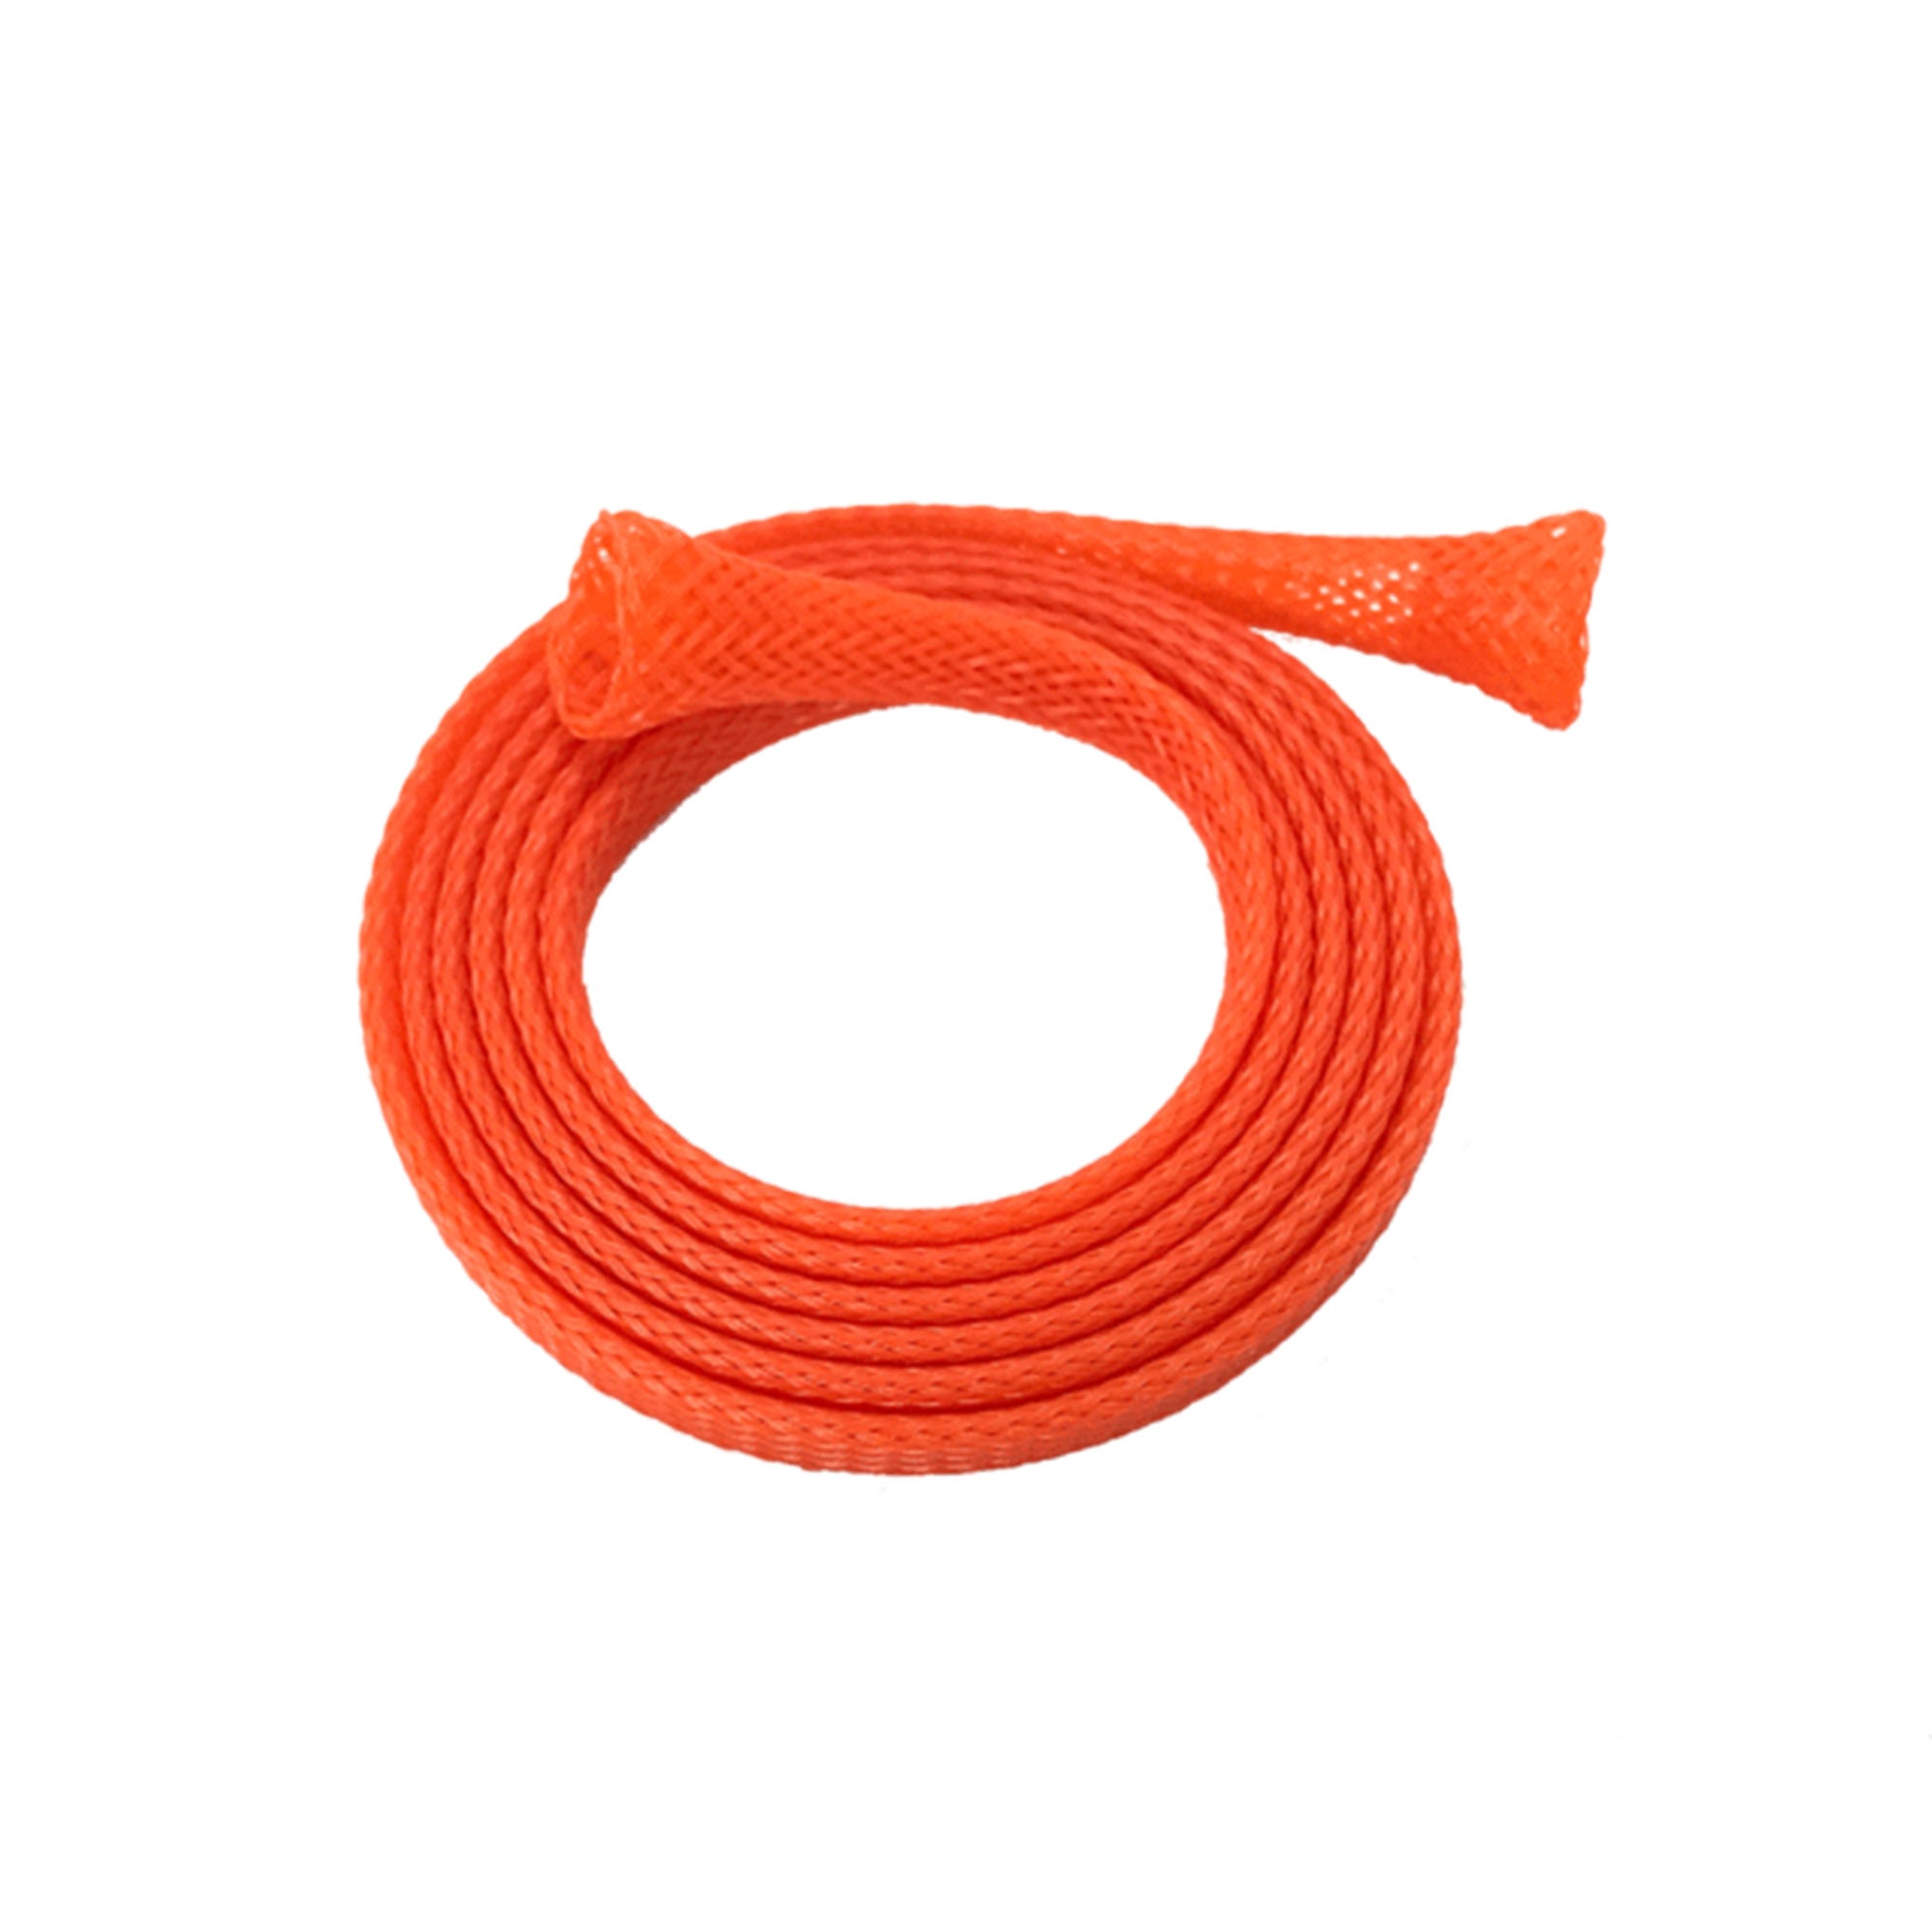 snake skinz metal detector coil wire covers hunter orange color